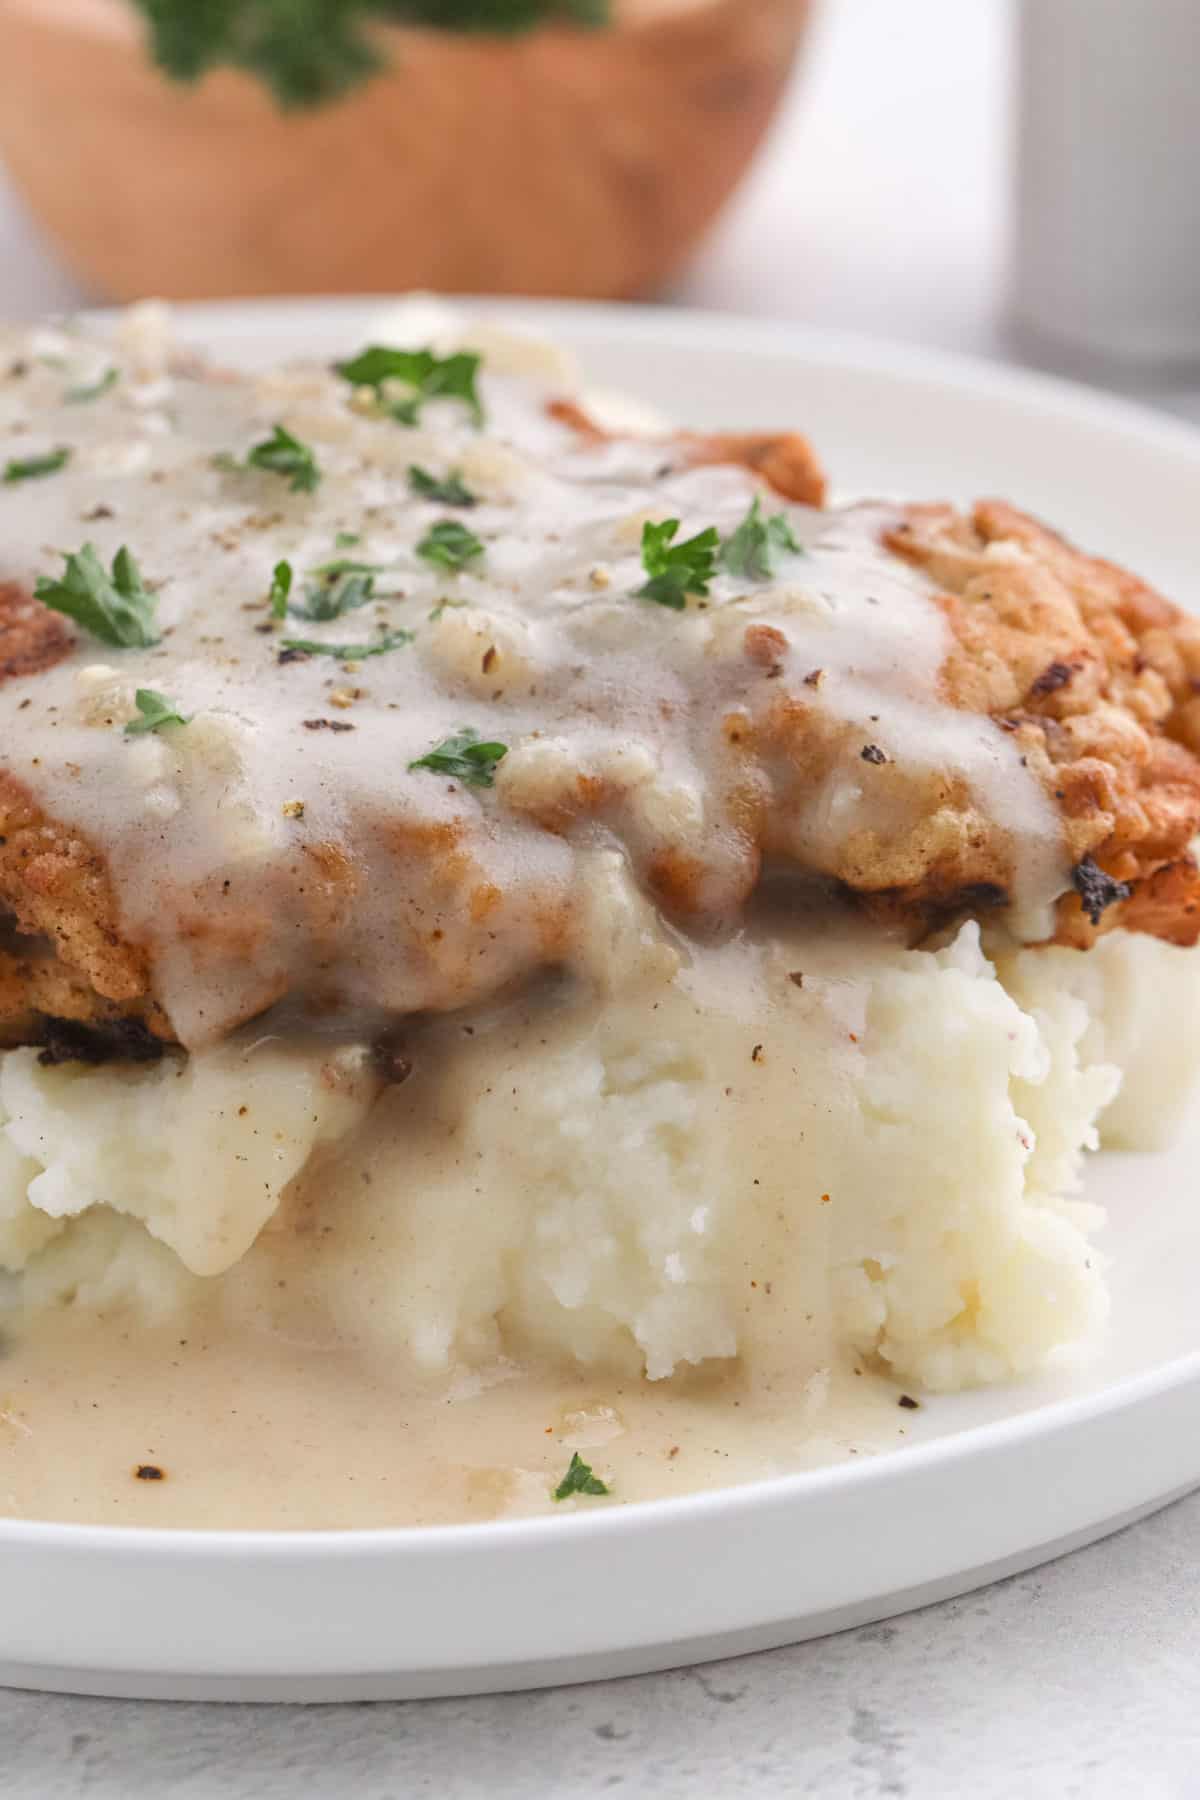 A close up of chicken fried steak on a bed of mashed potatoes